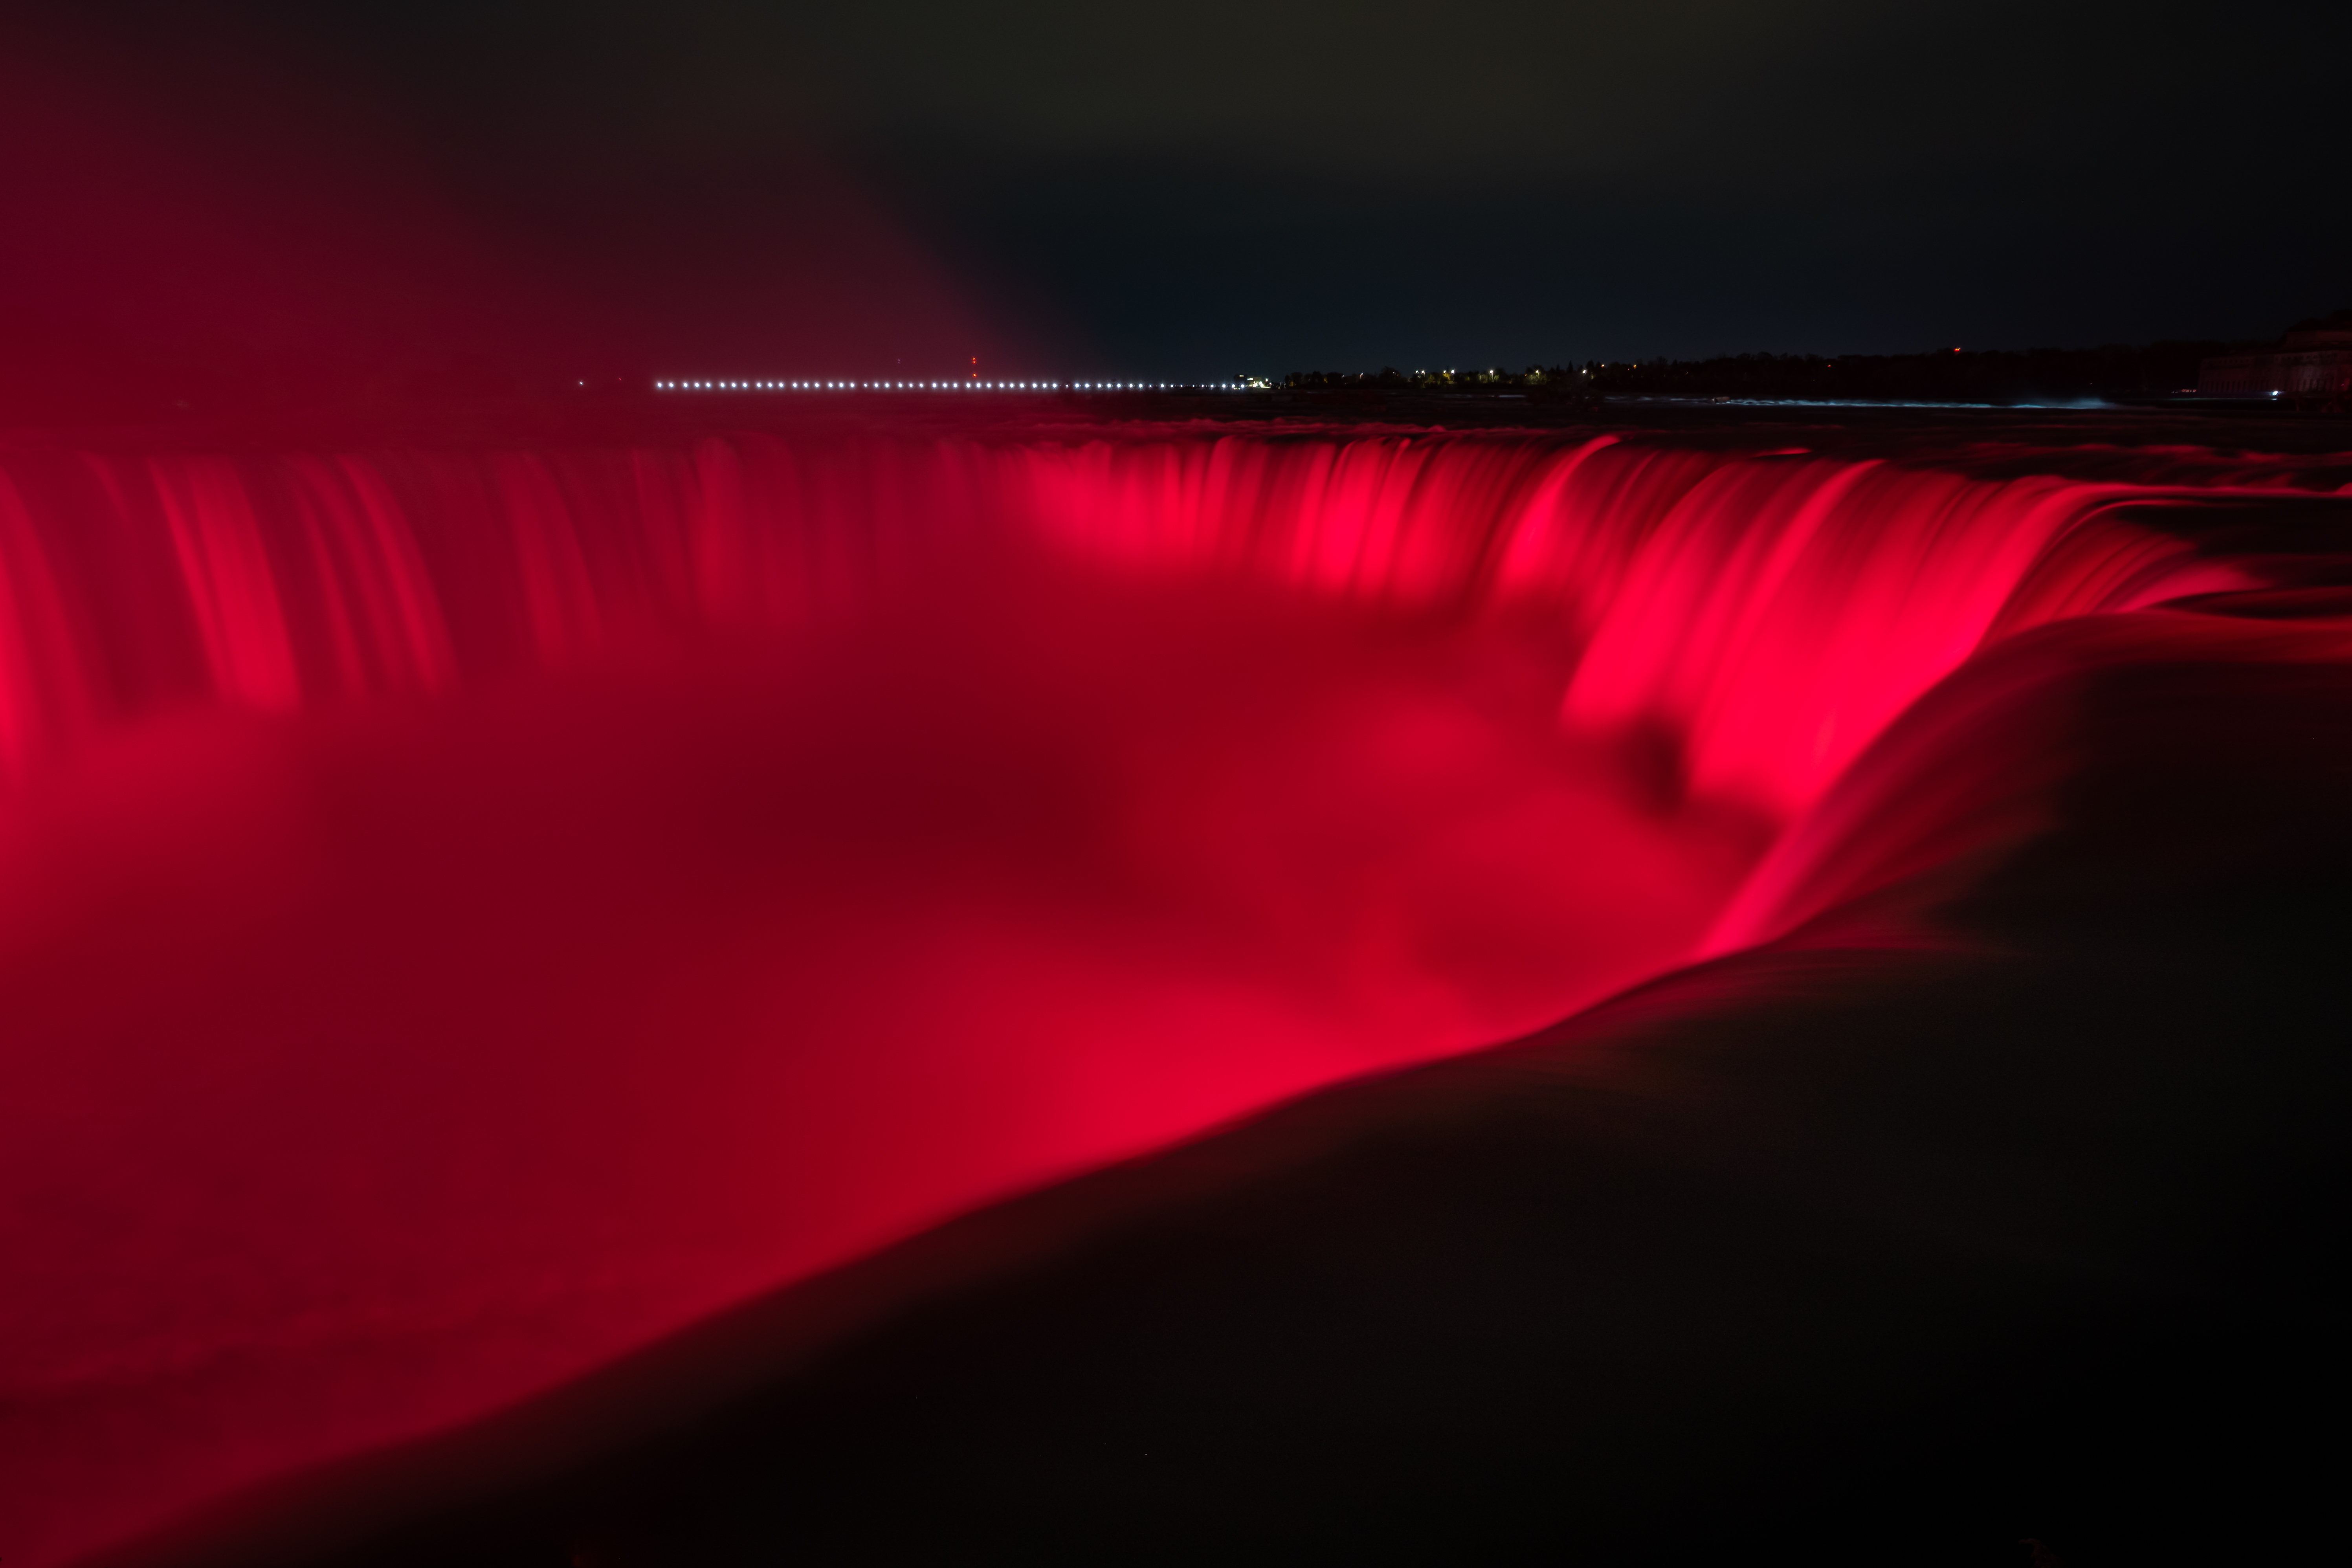 Niagara Falls to be Illuminated for Remembrance Day and Veterans Day